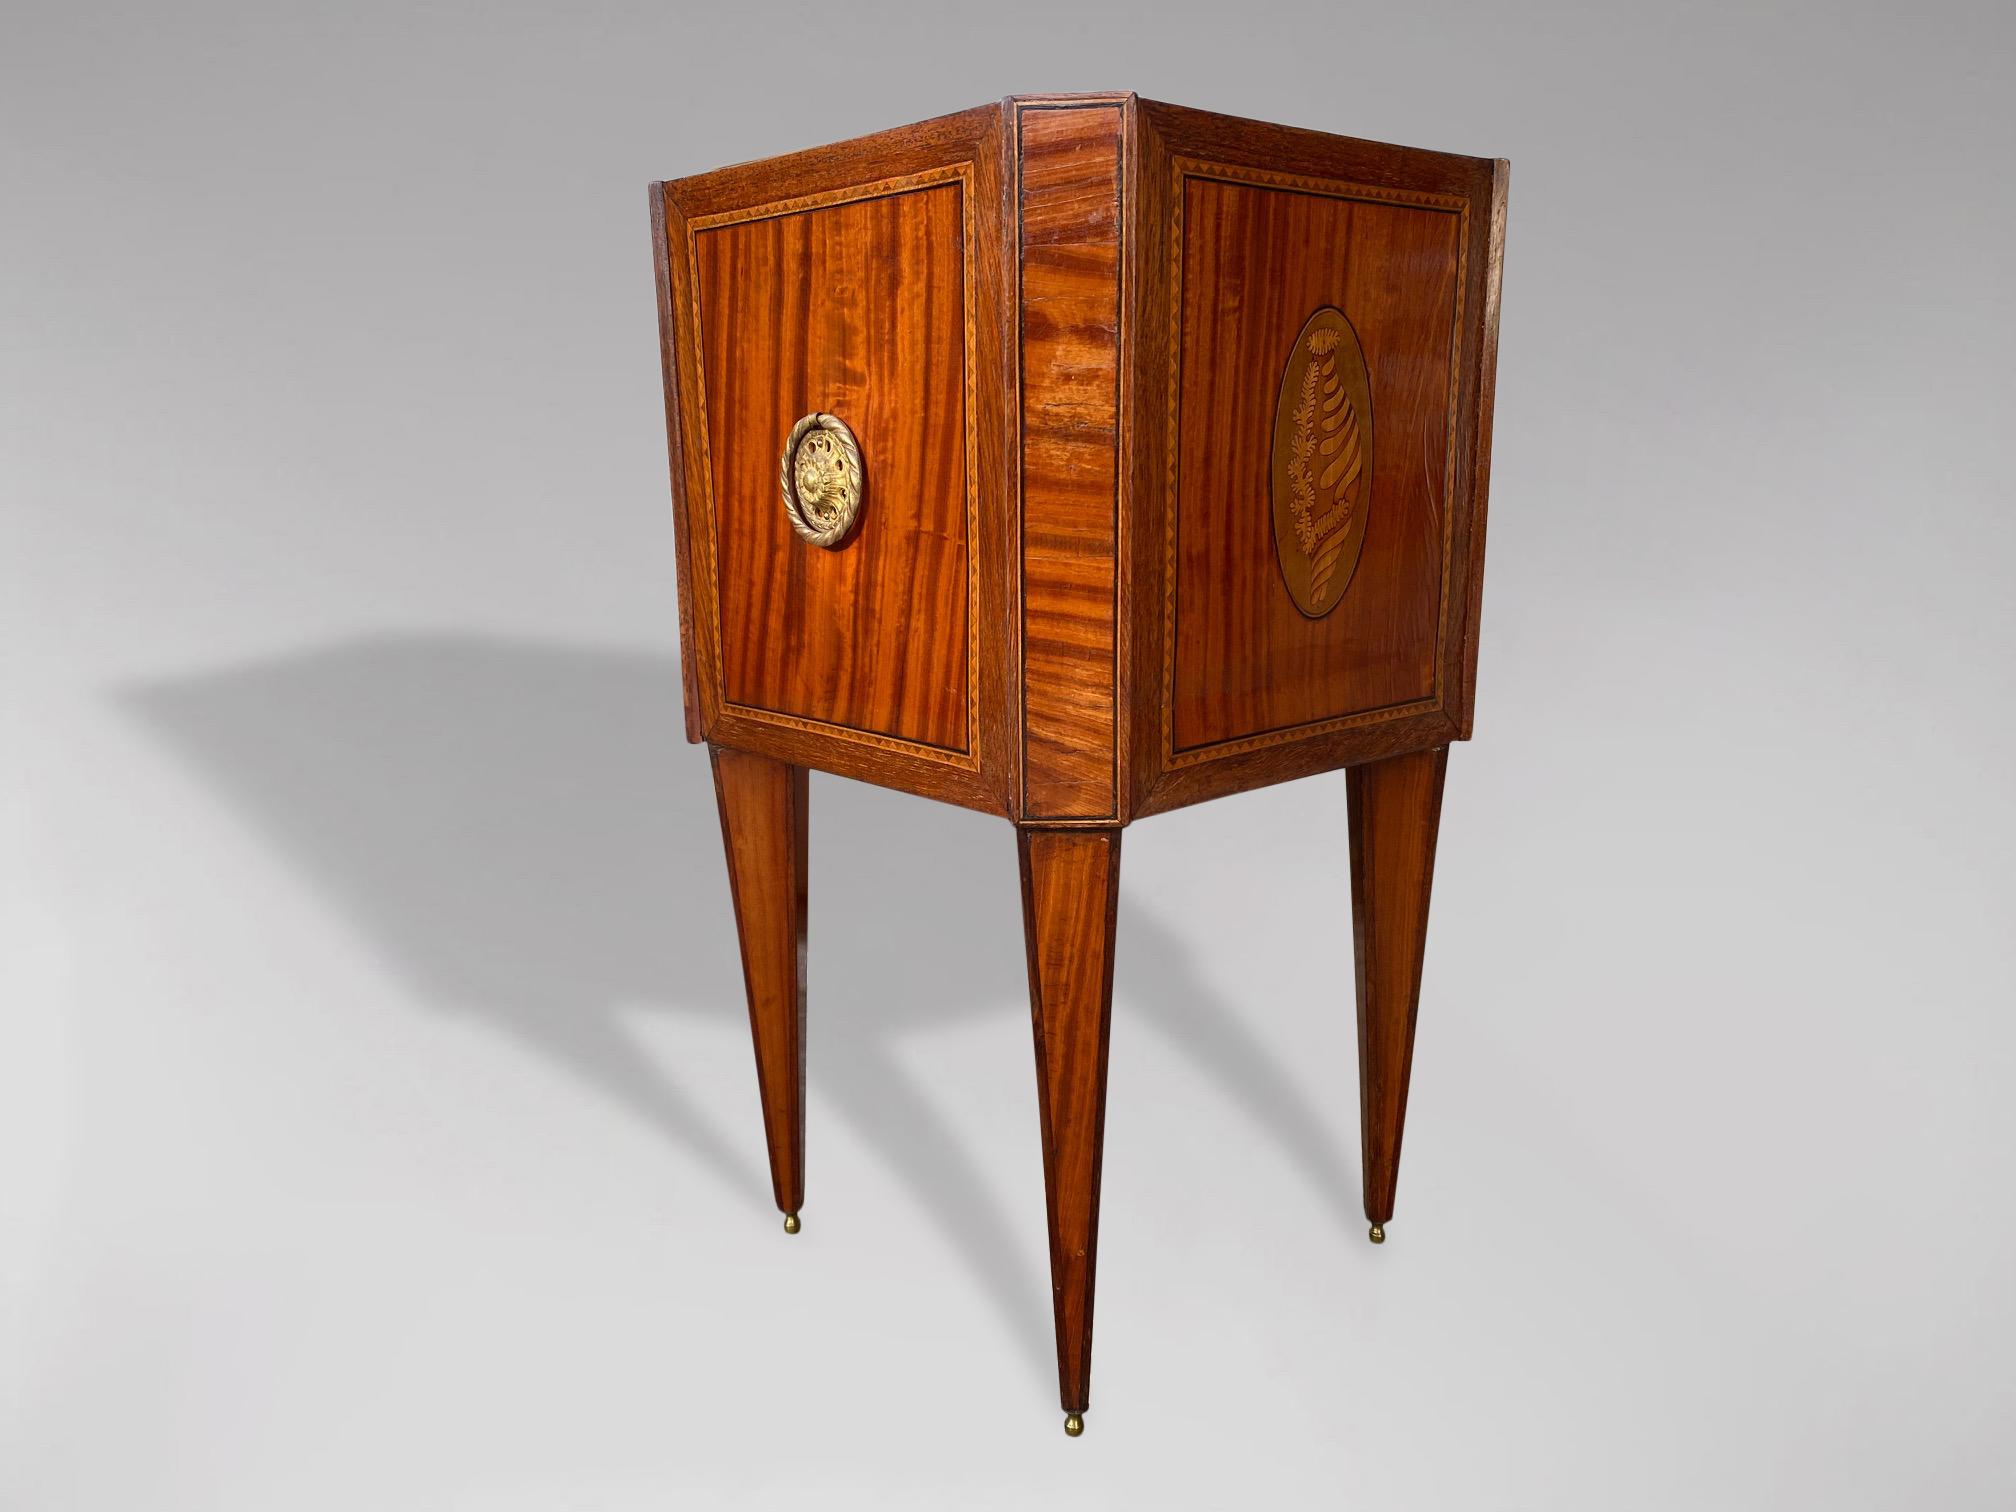 20th Century Edwardian Period Mahogany and Marquetry Jardinière 2